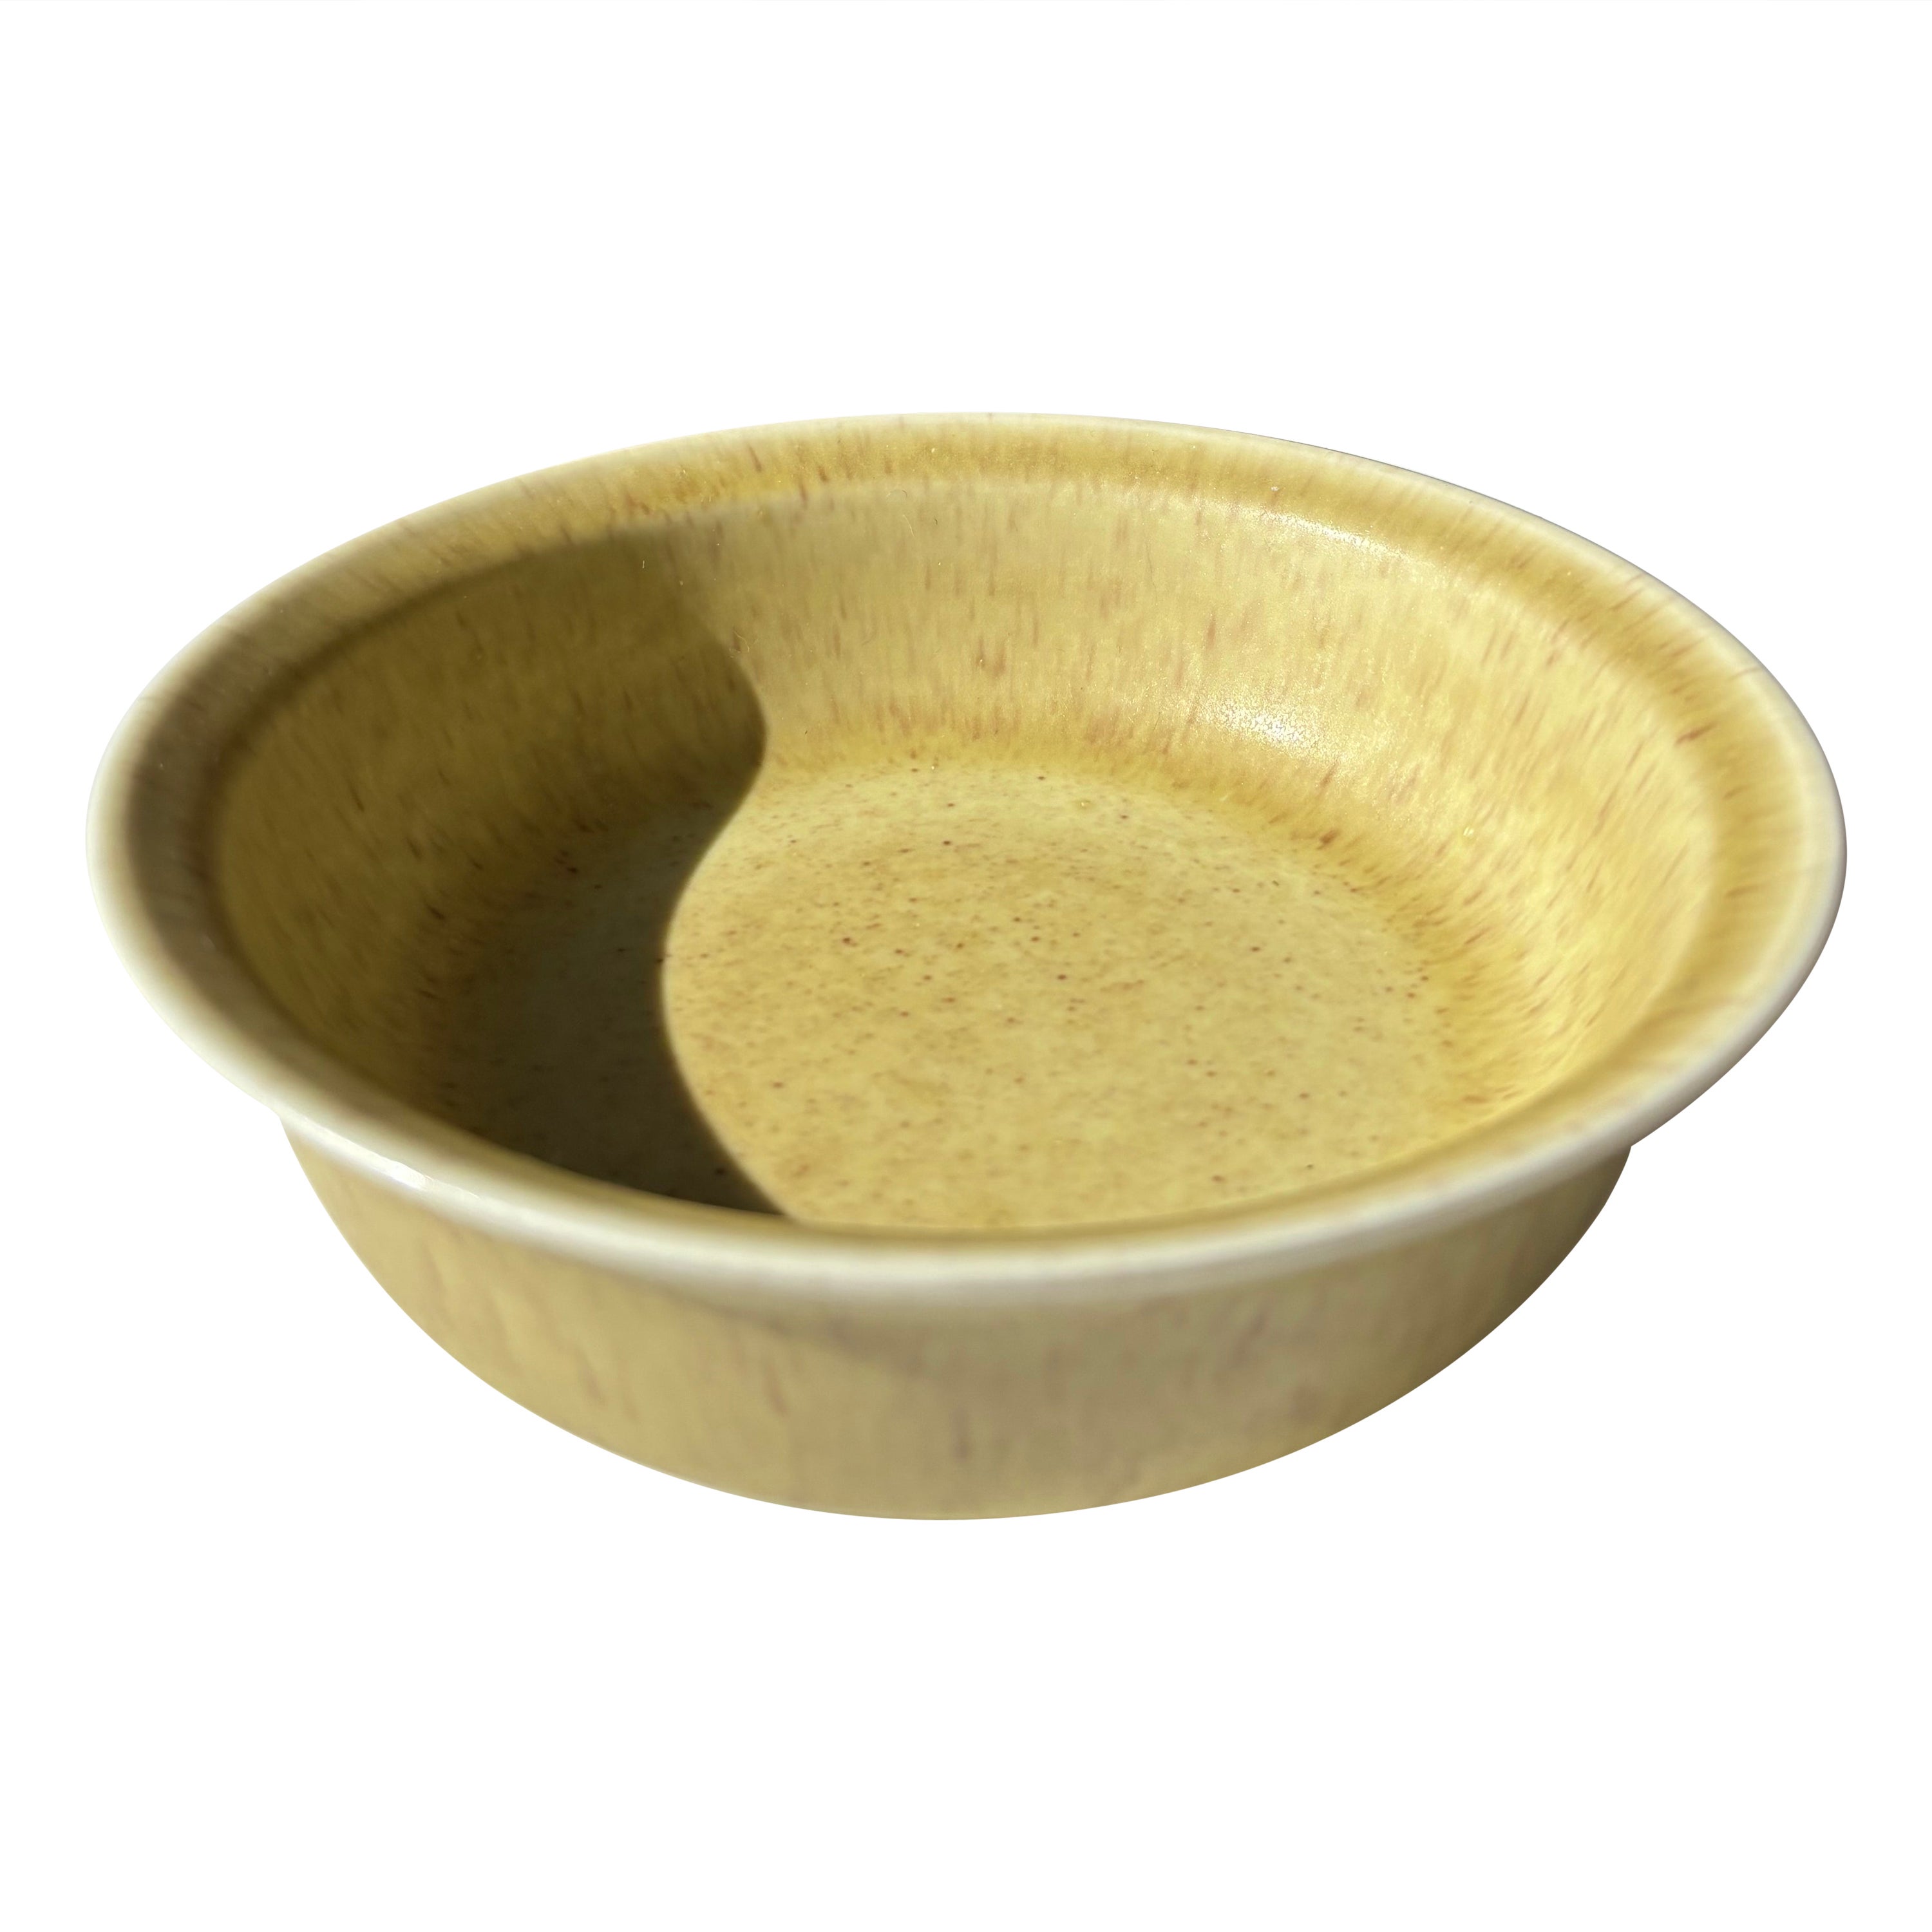 Gunnar Nylund for Rörstrand Dusty Yellow Ceramic Bowl, 1960s For Sale